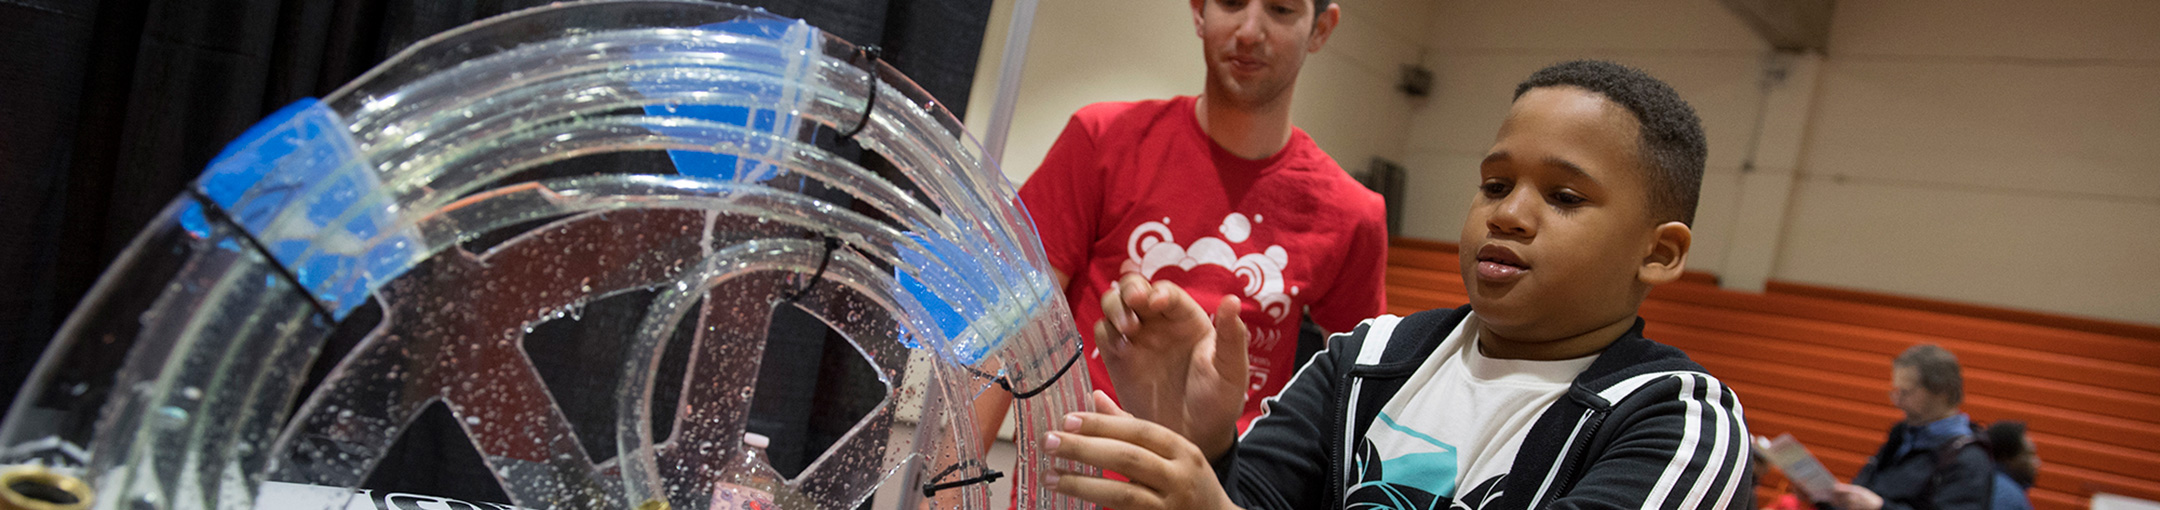 A child using a clear instrument at Imagine RIT.